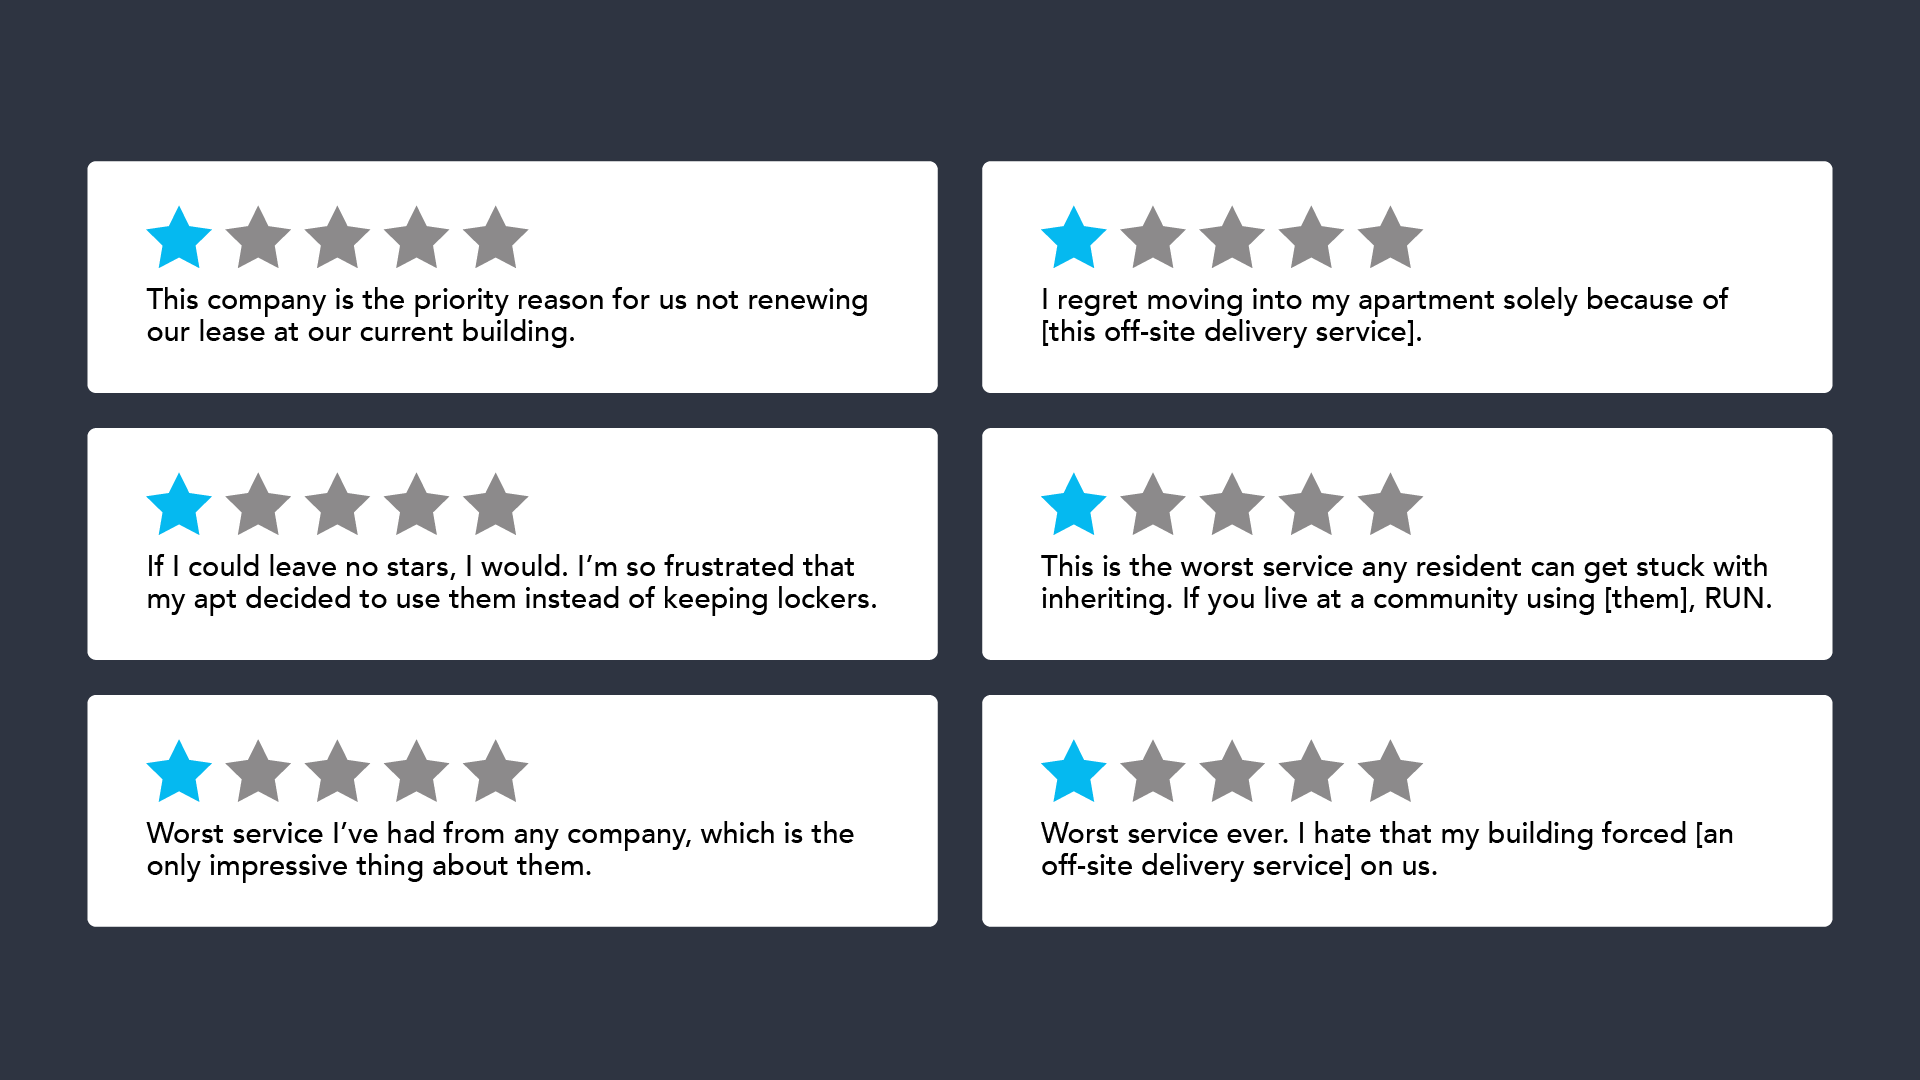 One-star reviews from residents using an off-site delivery service